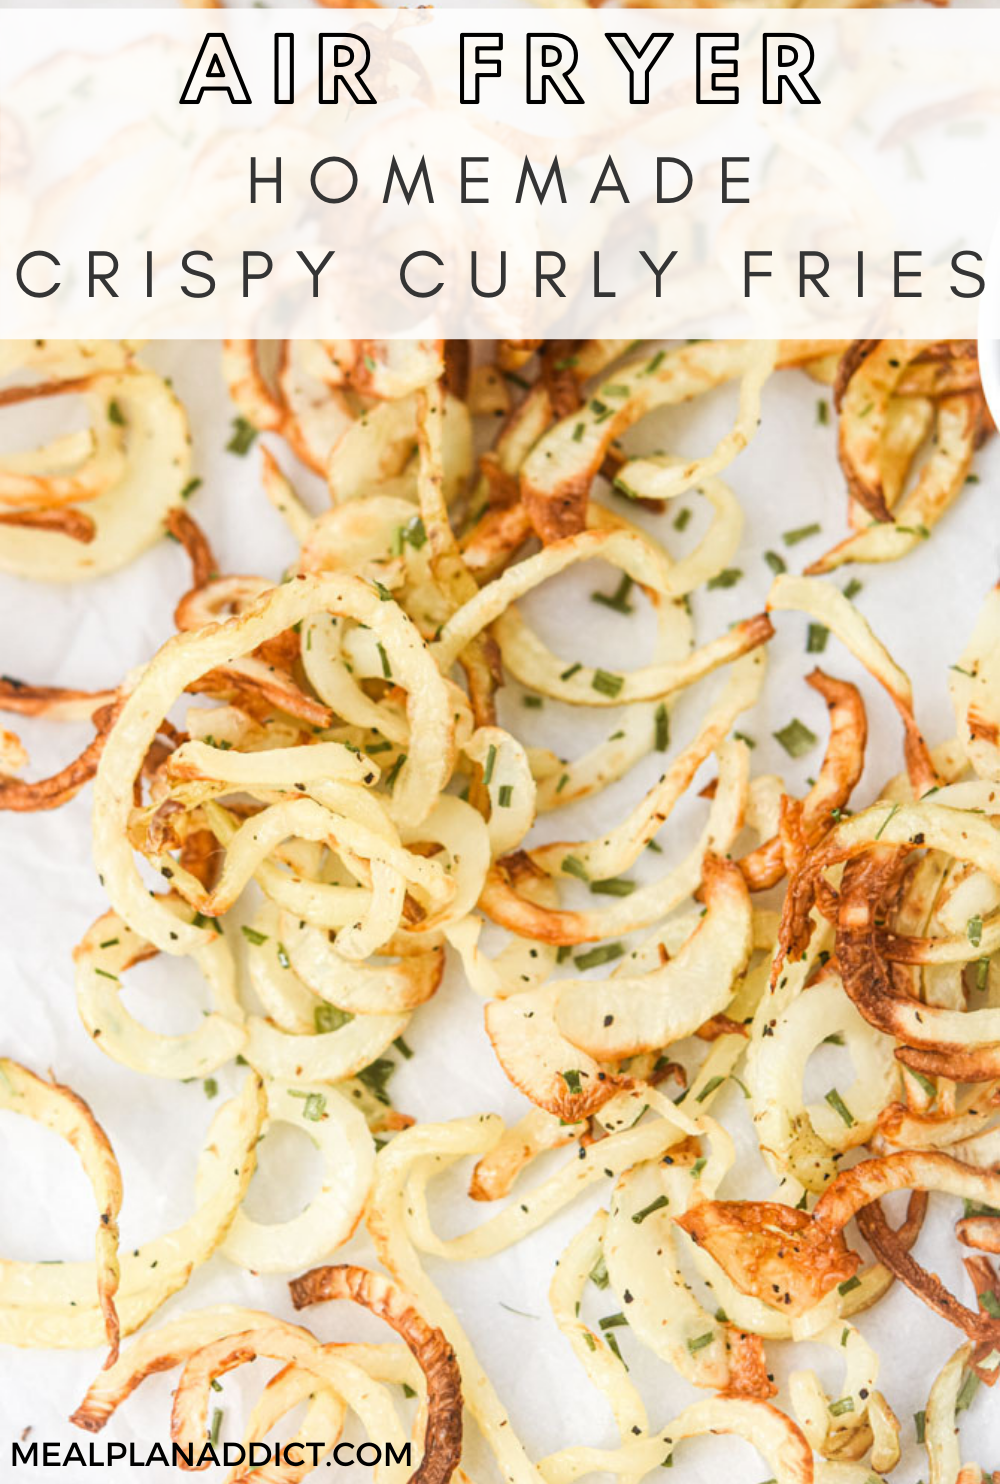 Crispy curly fries pin for Pinterest